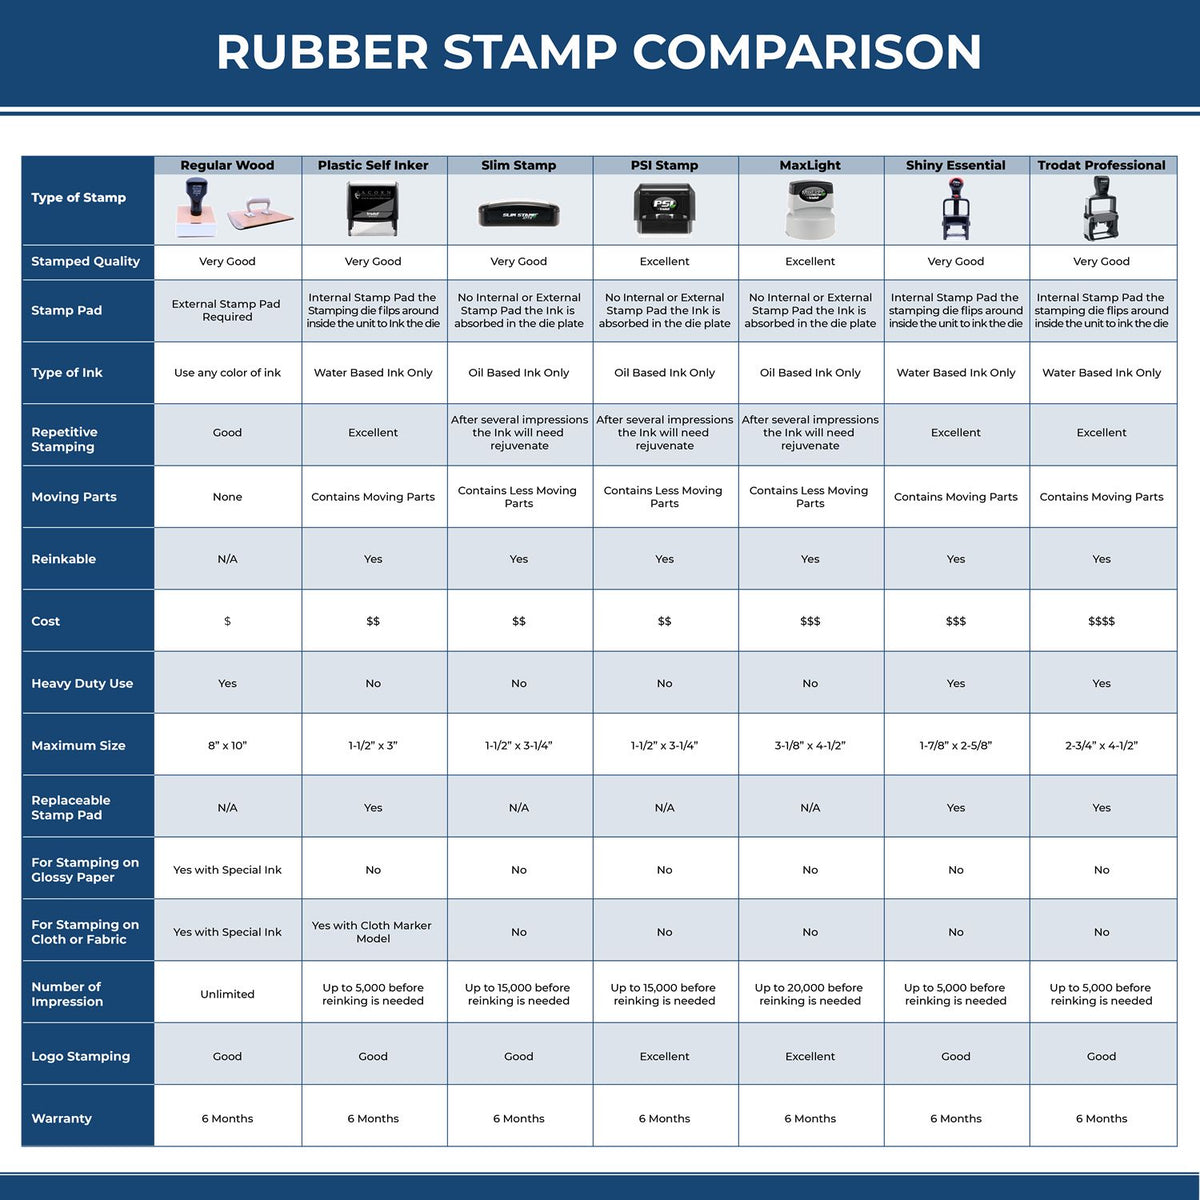 Large Self-Inking To The Parents Of with Line Stamp 5596S Rubber Stamp Comparison